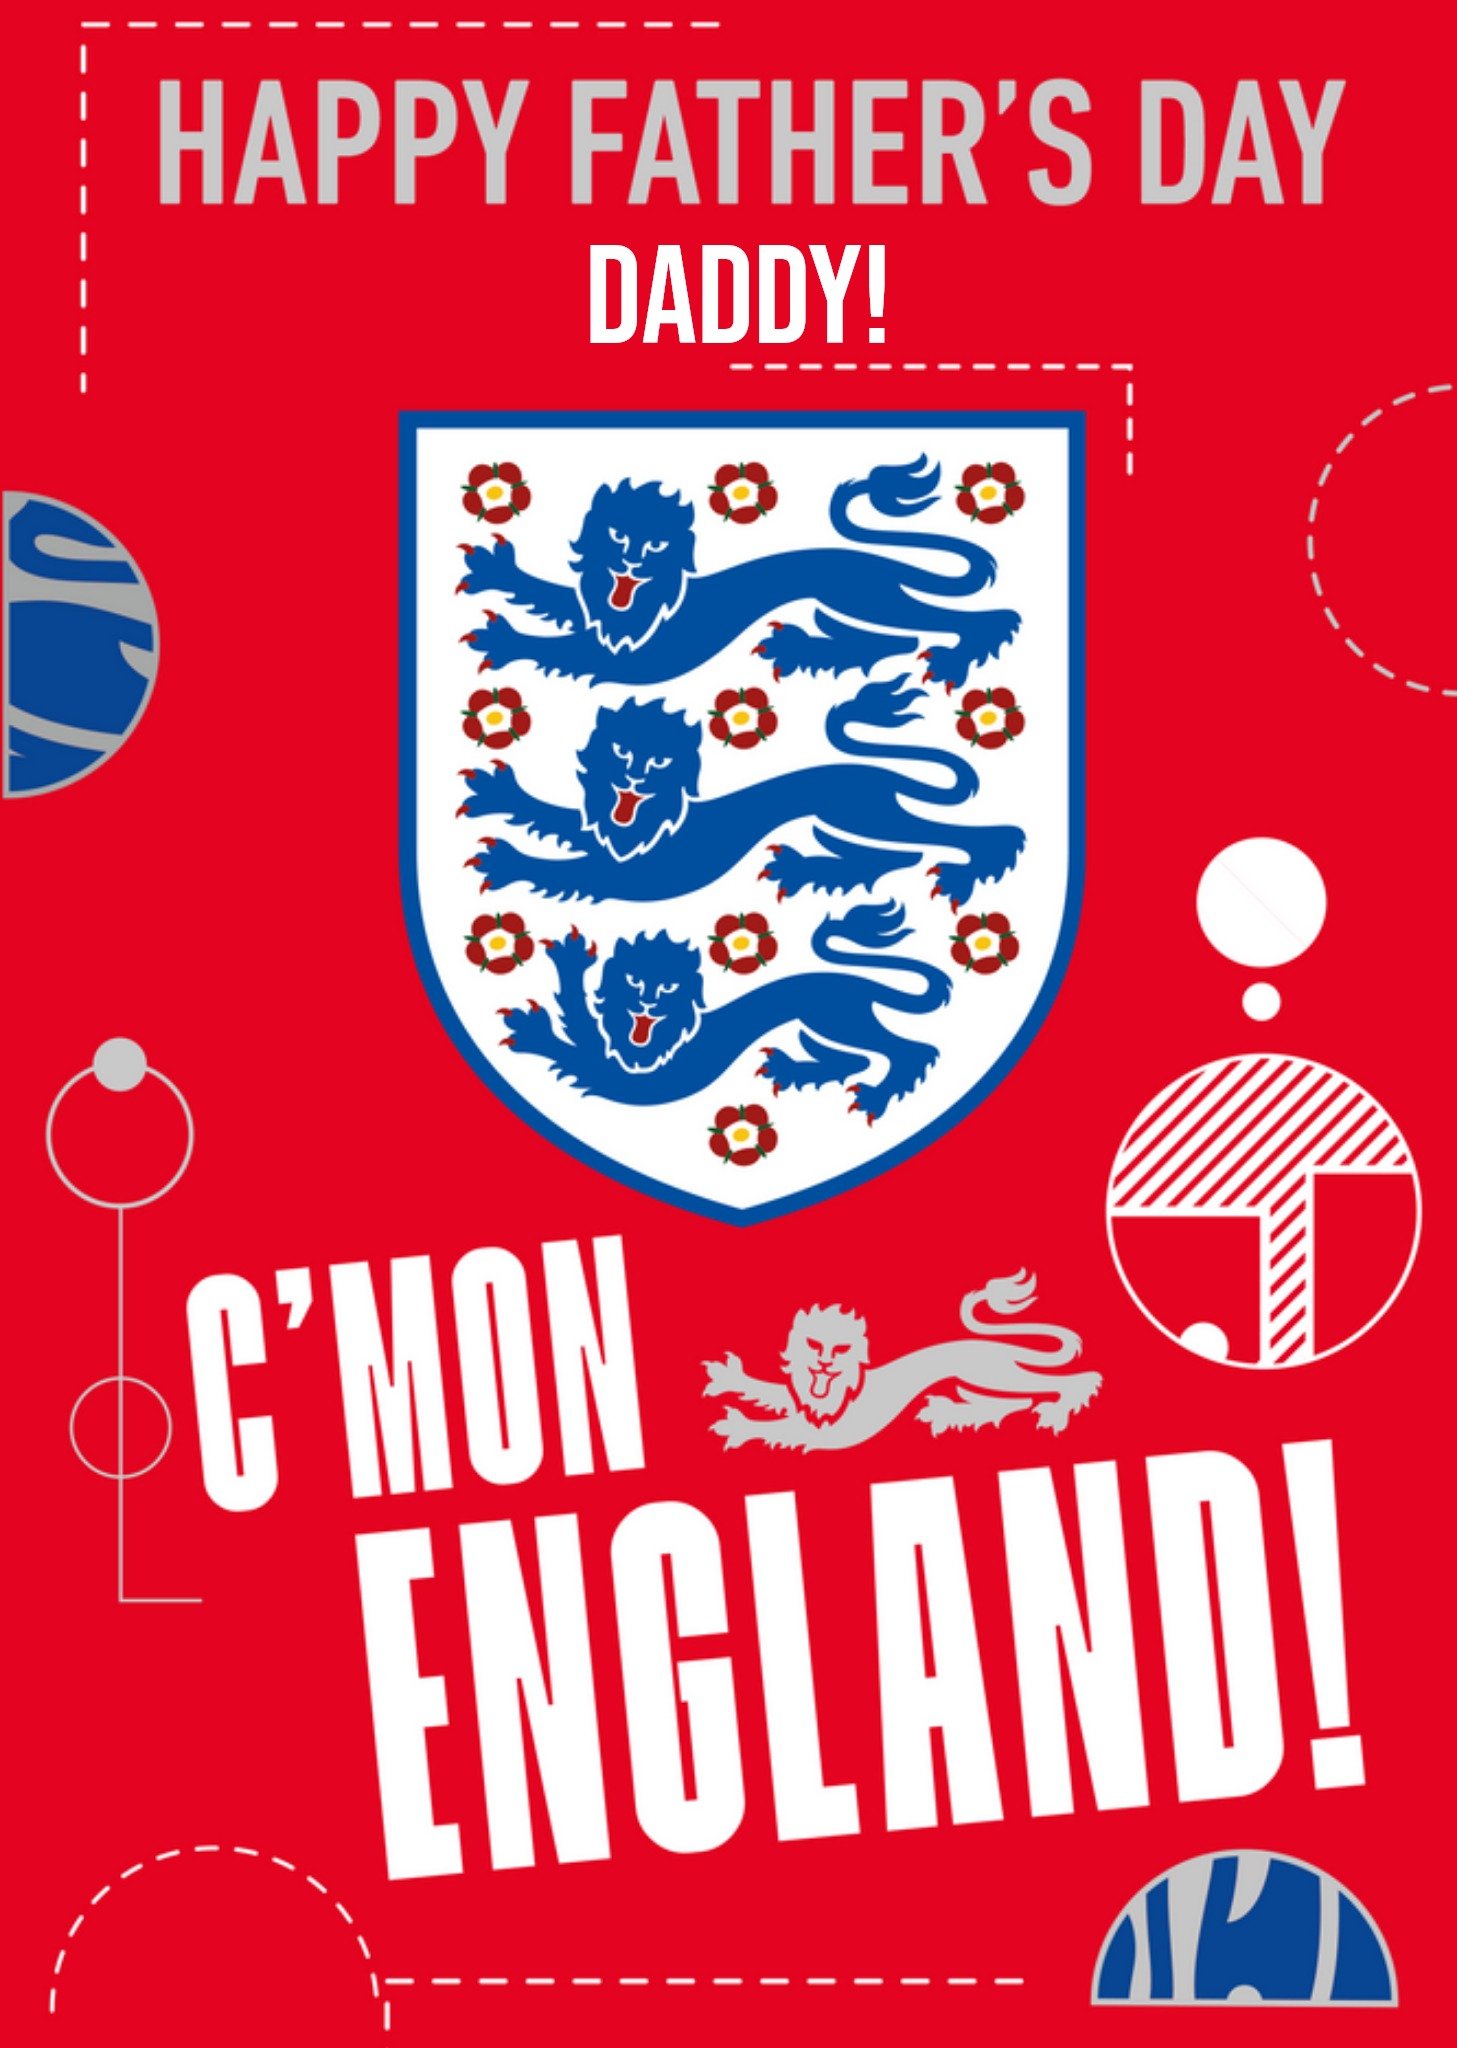 Other Danilo England Happy Fathers Day Daddy Come On England 3 Lions Shield Card Ecard